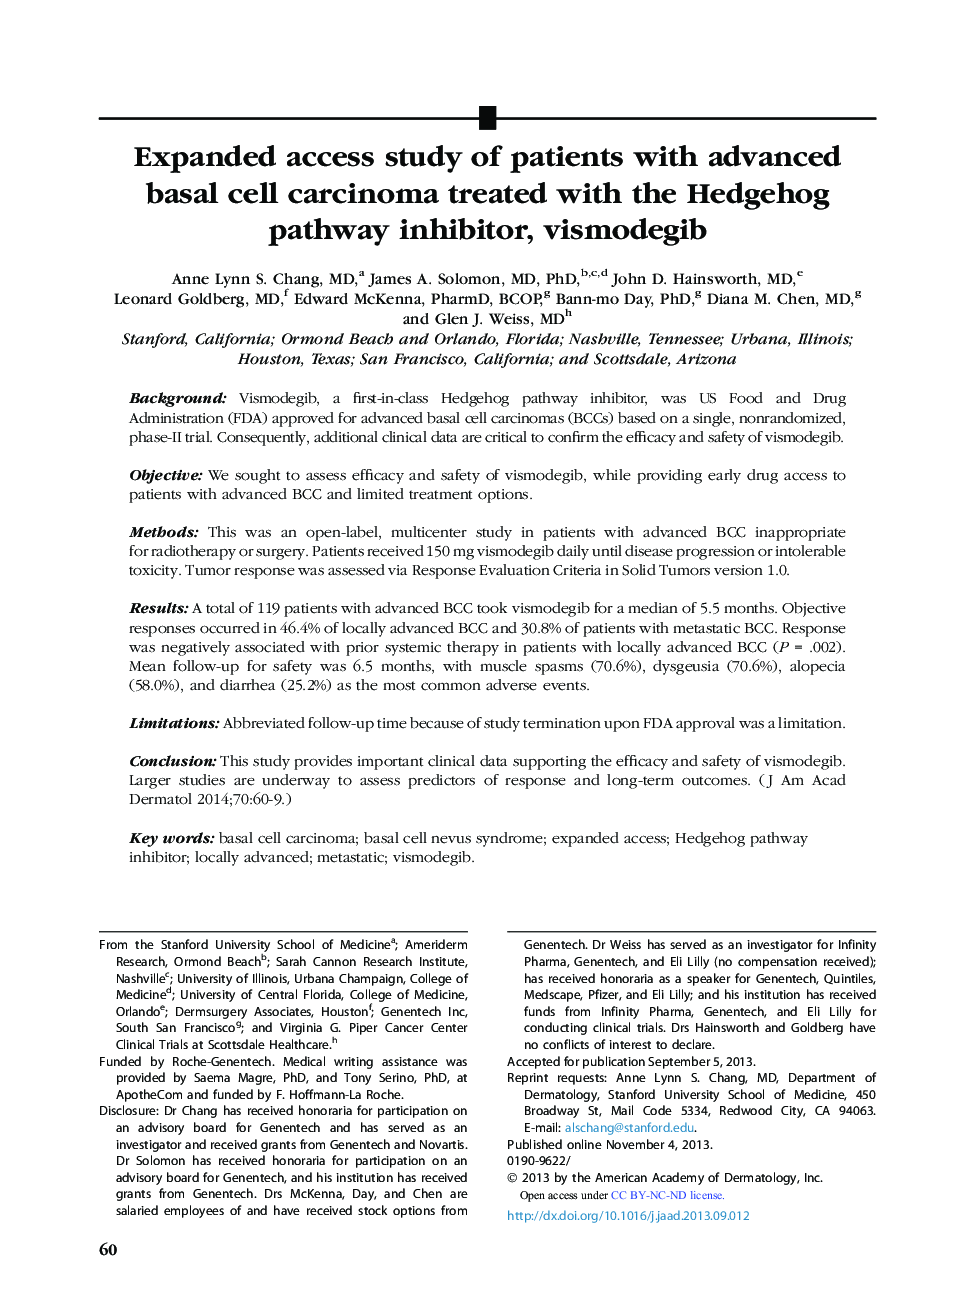 Original articleExpanded access study of patients with advanced basalÂ cell carcinoma treated with the Hedgehog pathway inhibitor, vismodegib